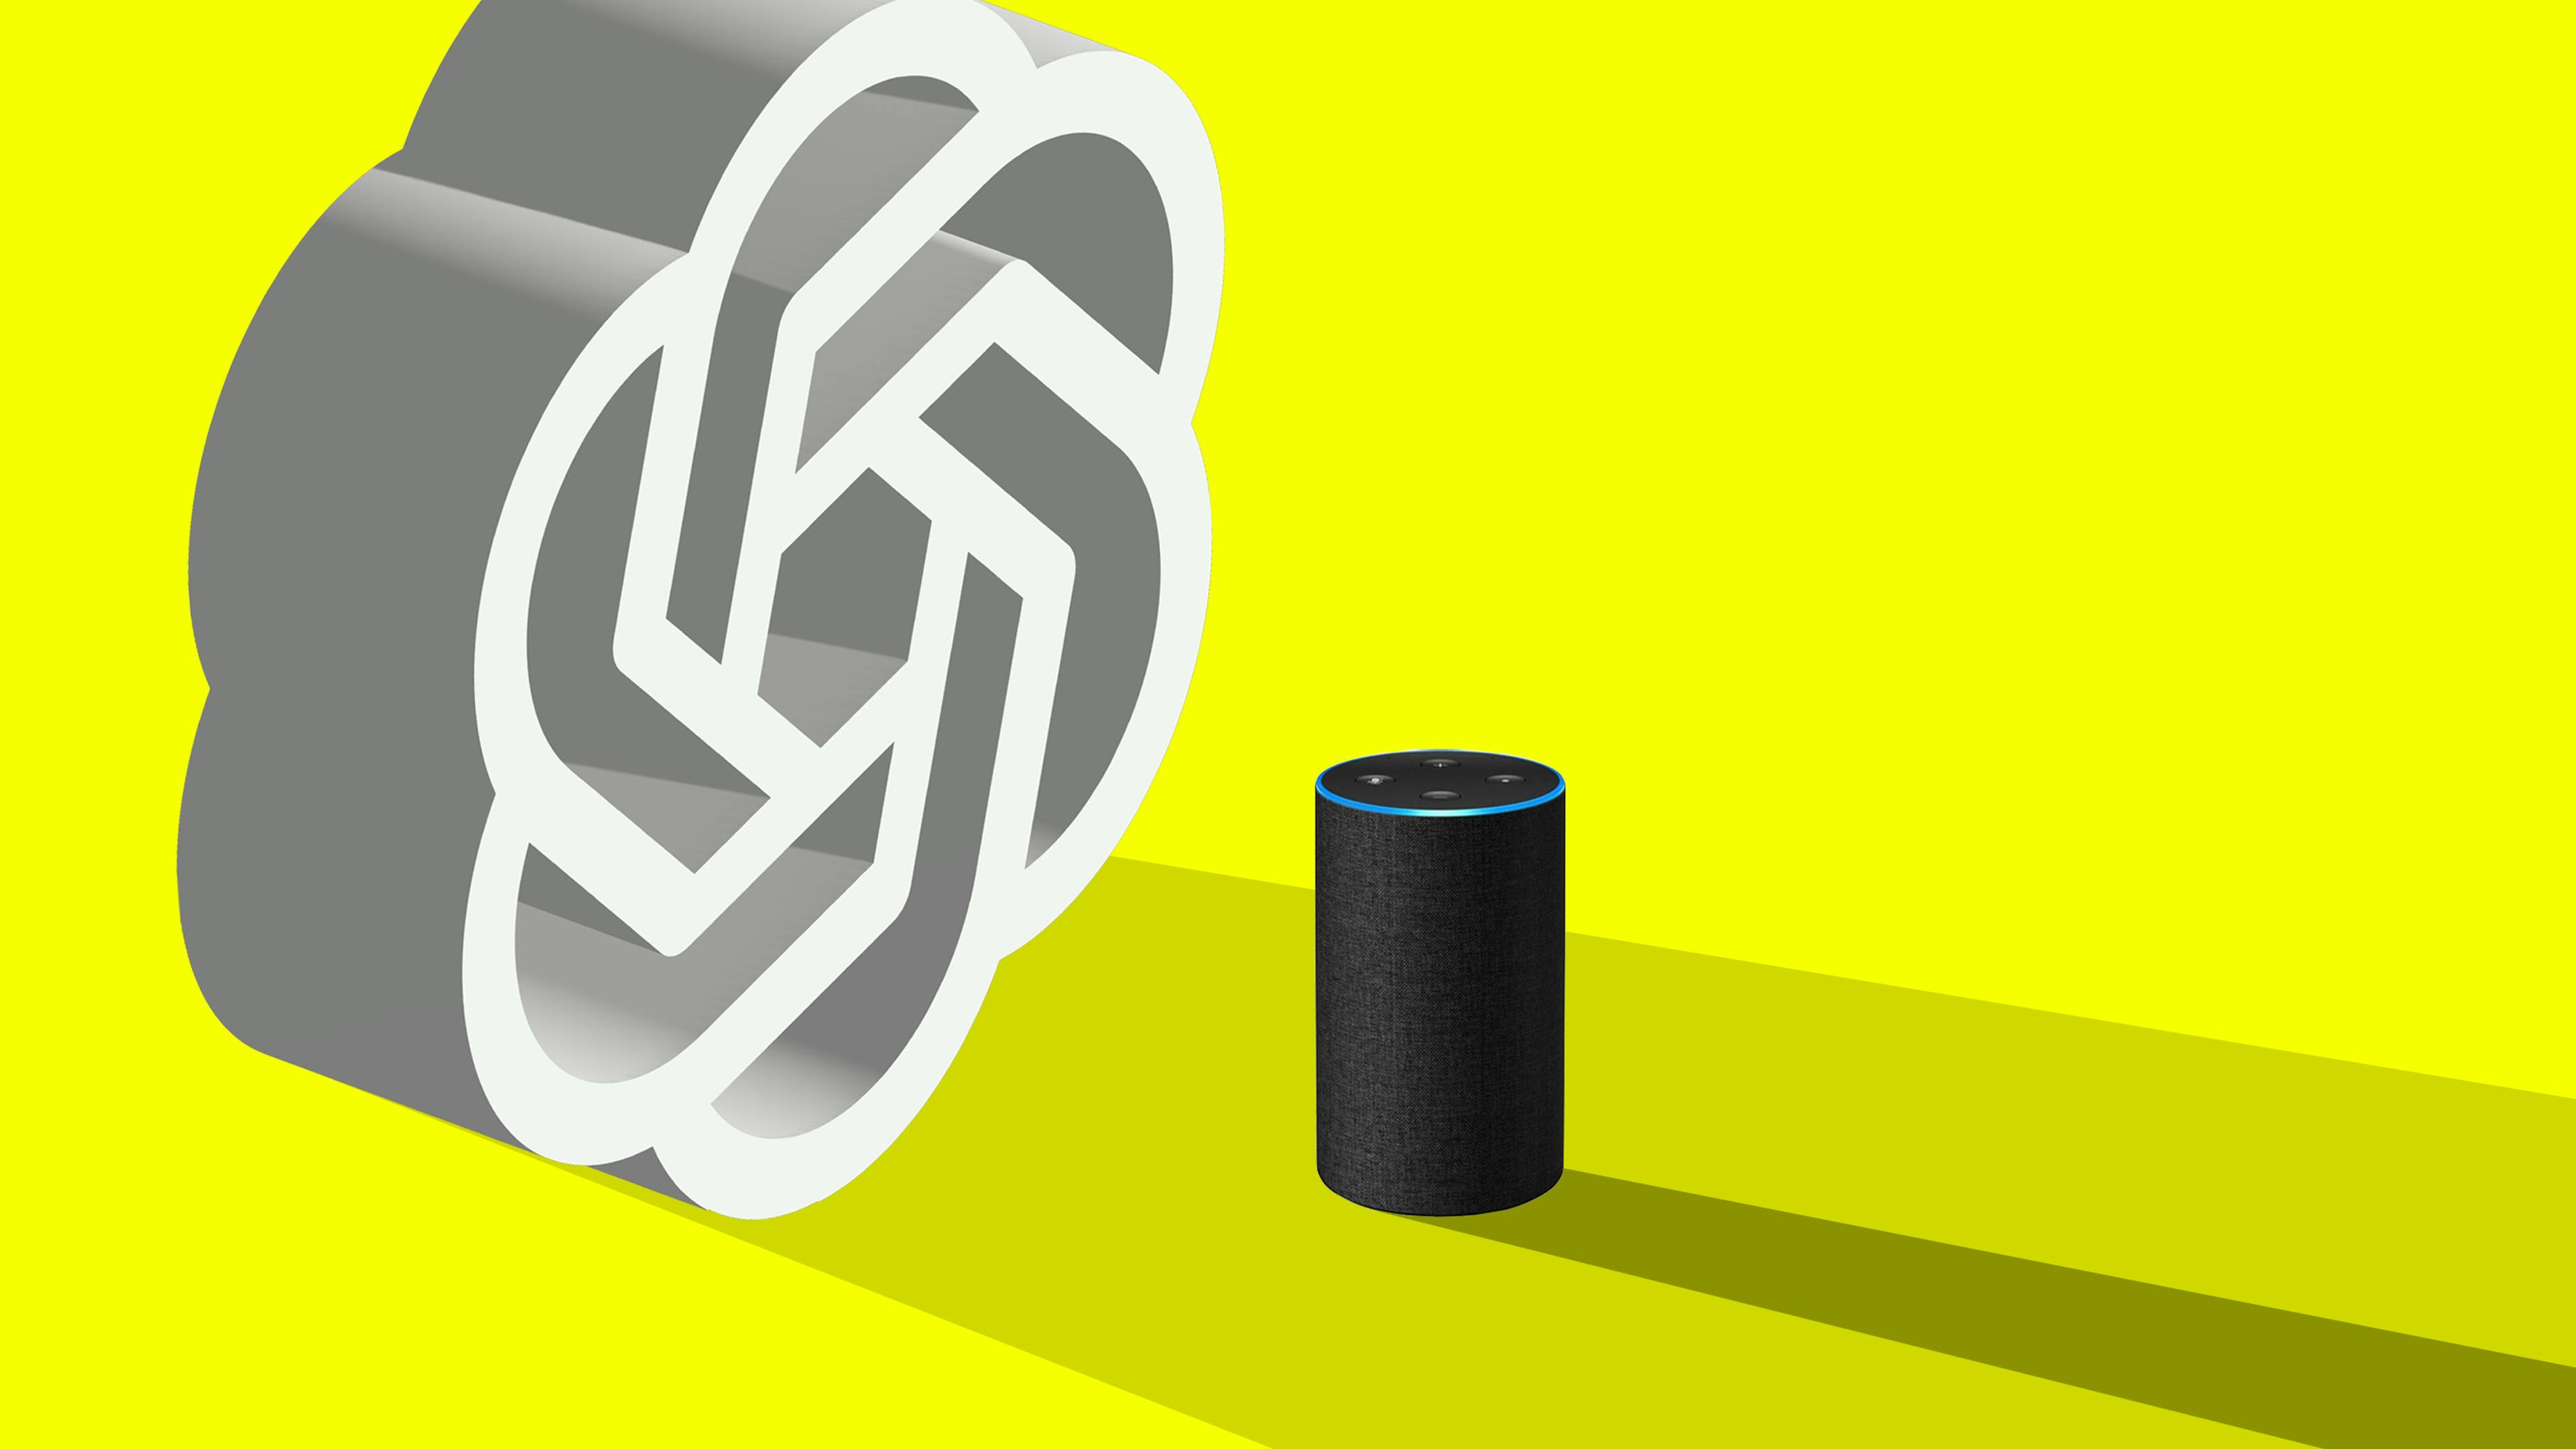 Alexa Has 10,000 Skills, But That Growth Creates Challenges